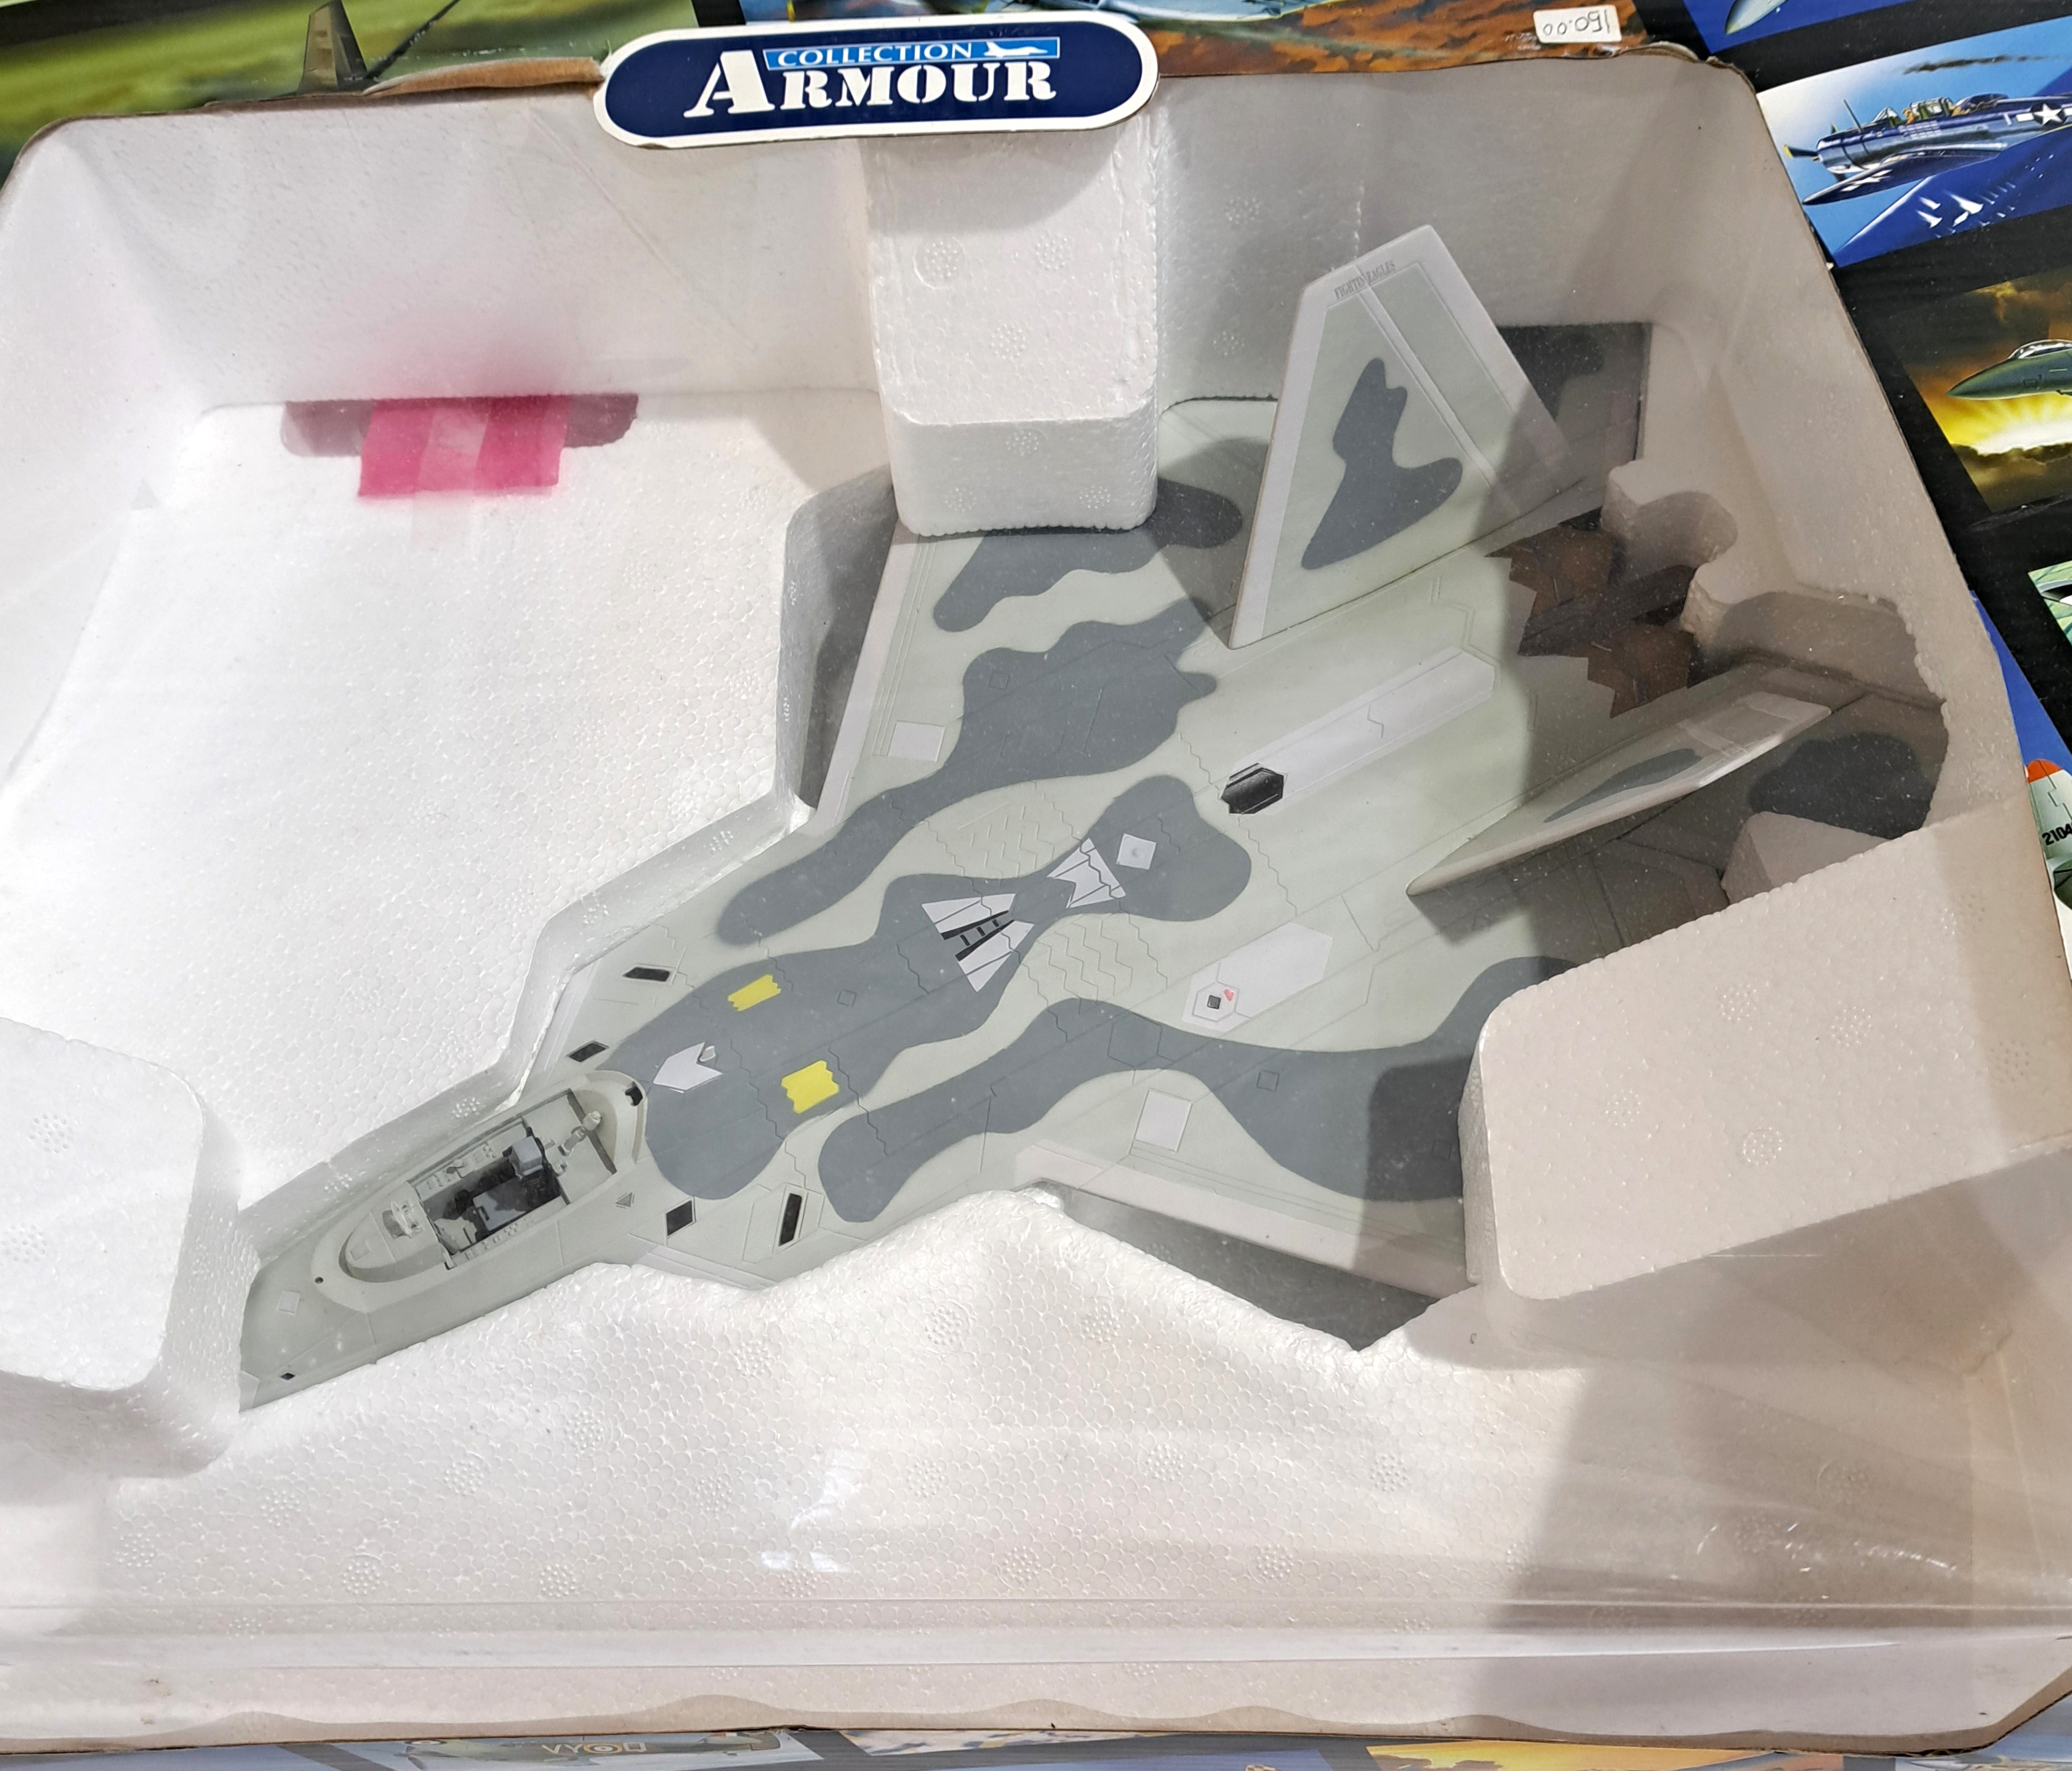 Franklin Mint  "Armour Collection", a boxed 1:48 scale B11E760 F22 Raptor - Image 2 of 2